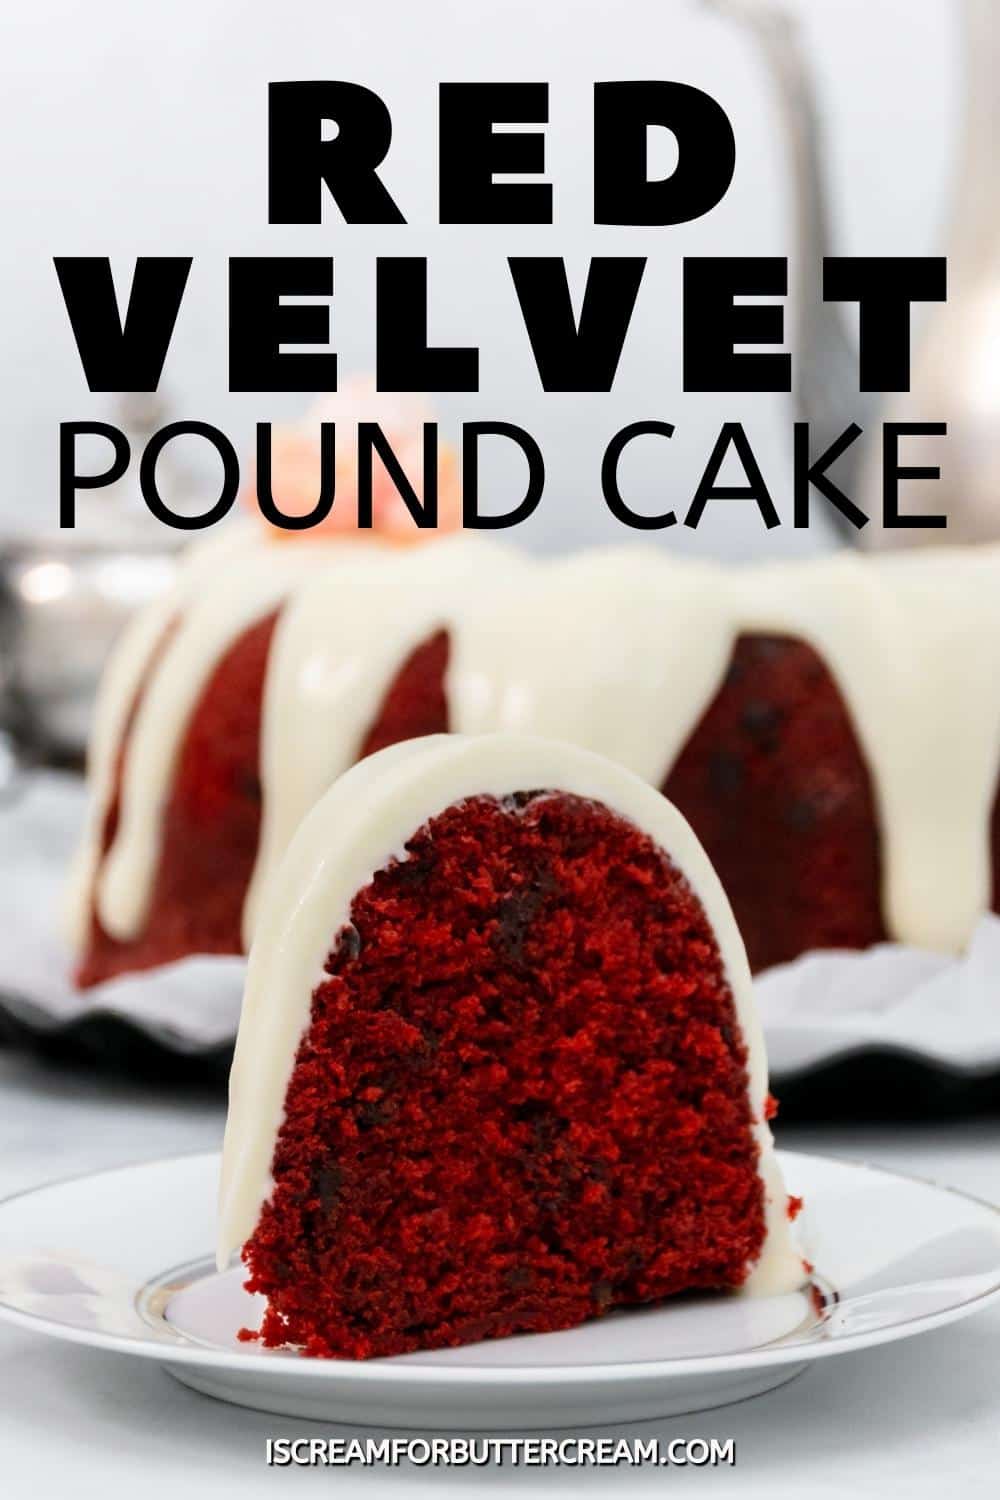 Red velvet pound cake with glaze pin graphic.